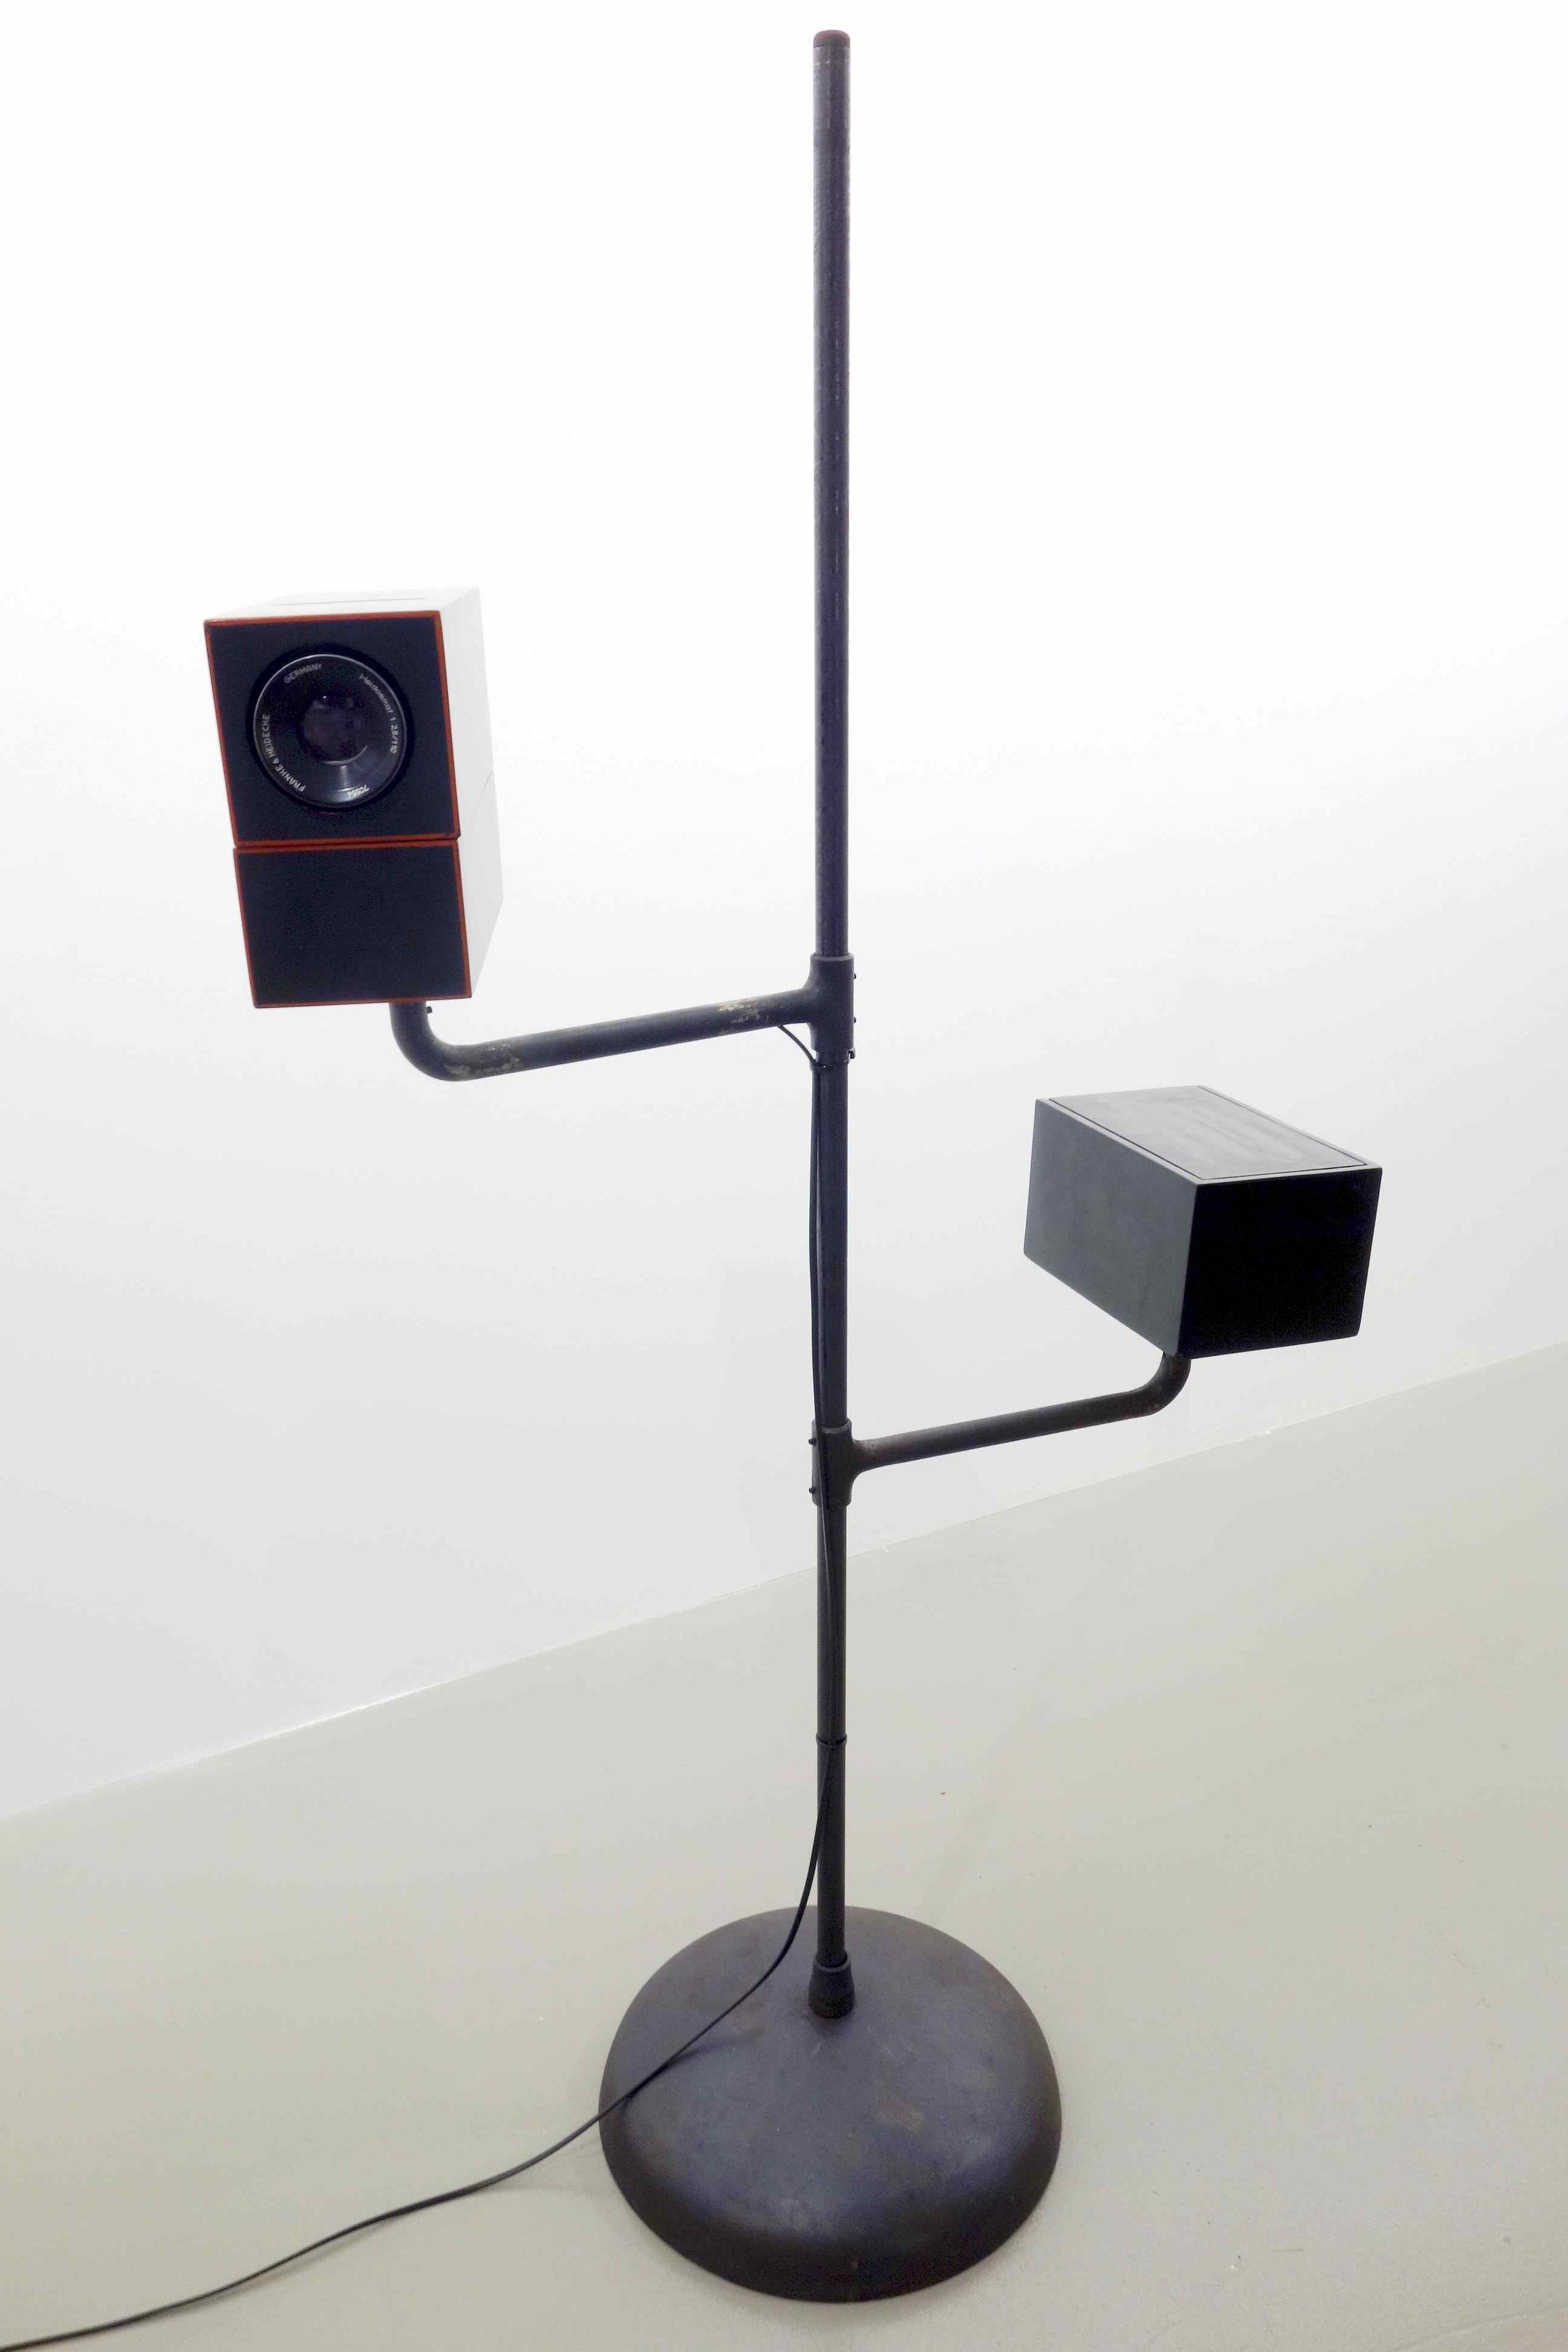   Lacquerscope #2  2014 Resin composite medium format (50mm) projector. Iron stand, base and swivel arms, 174.5 x 102 cm 